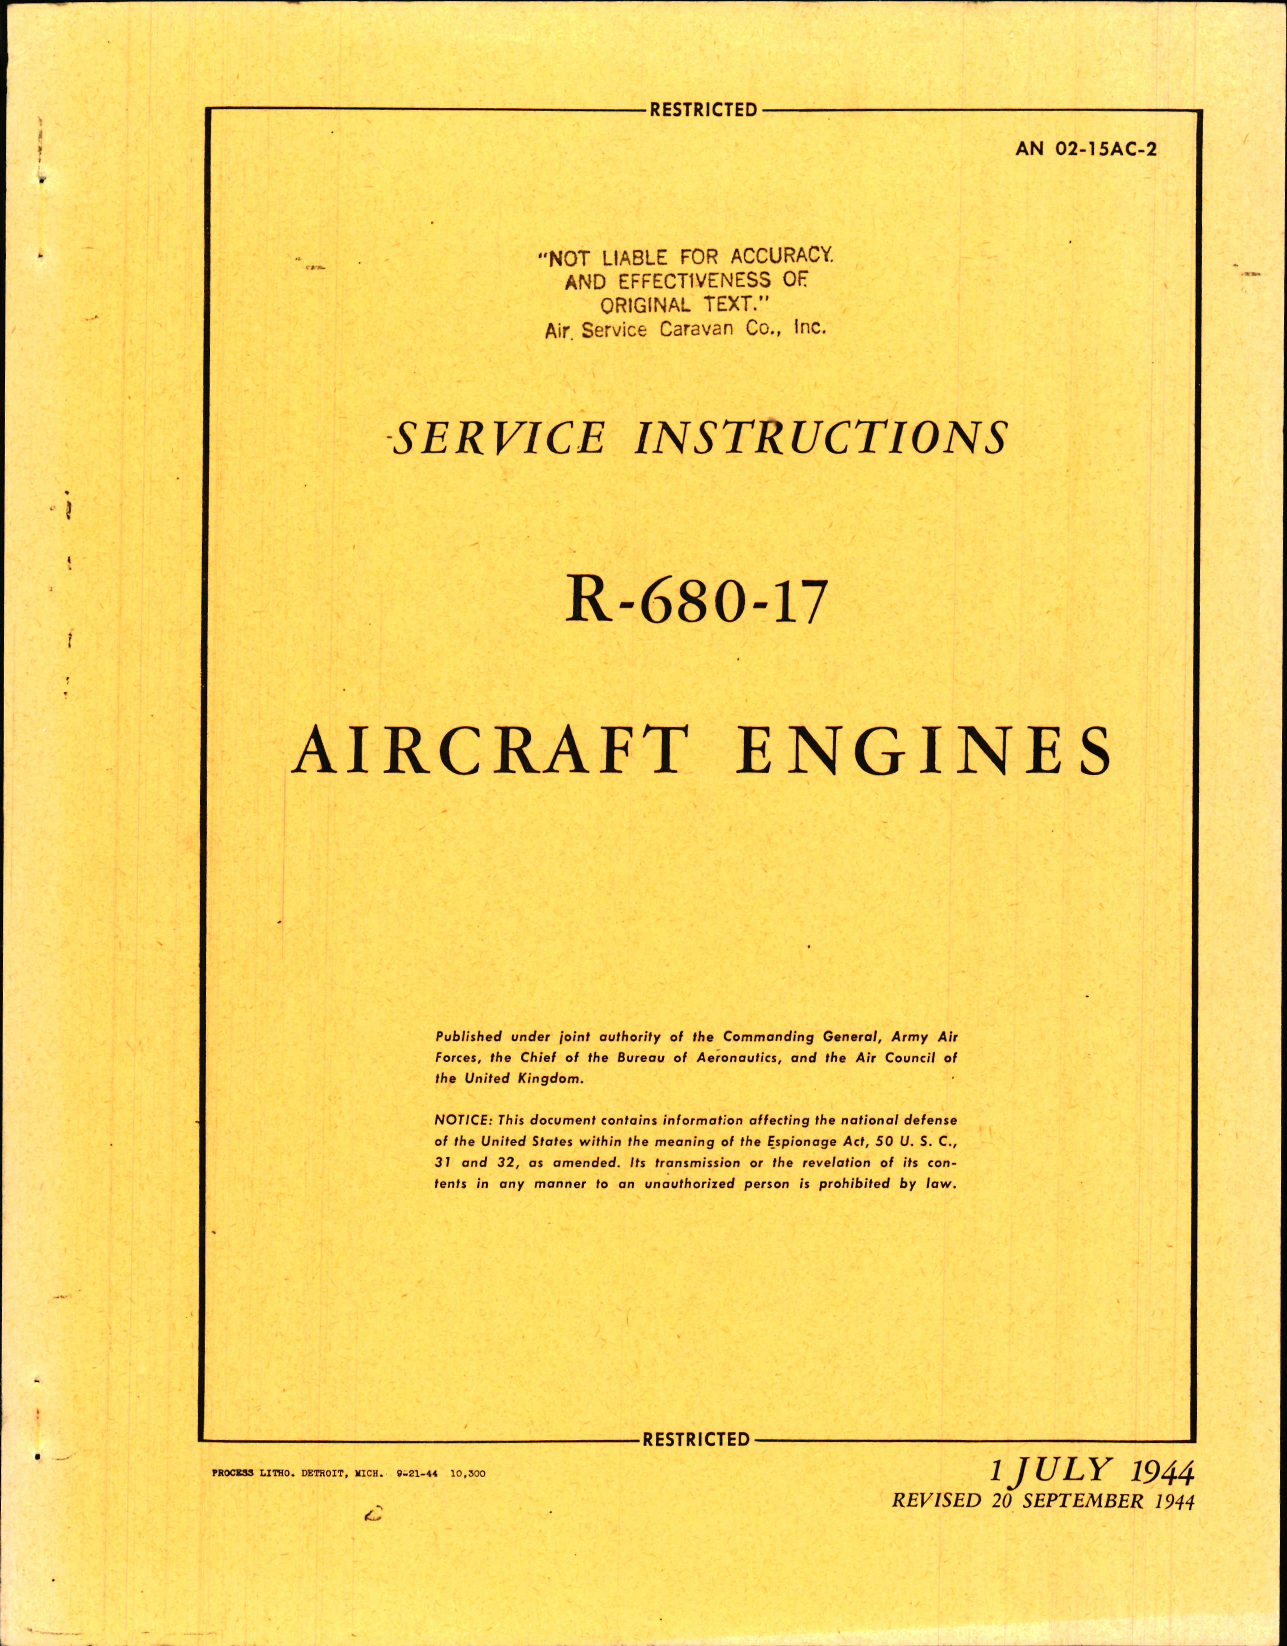 Sample page 1 from AirCorps Library document: Service Instructions for R-680-17 Engines